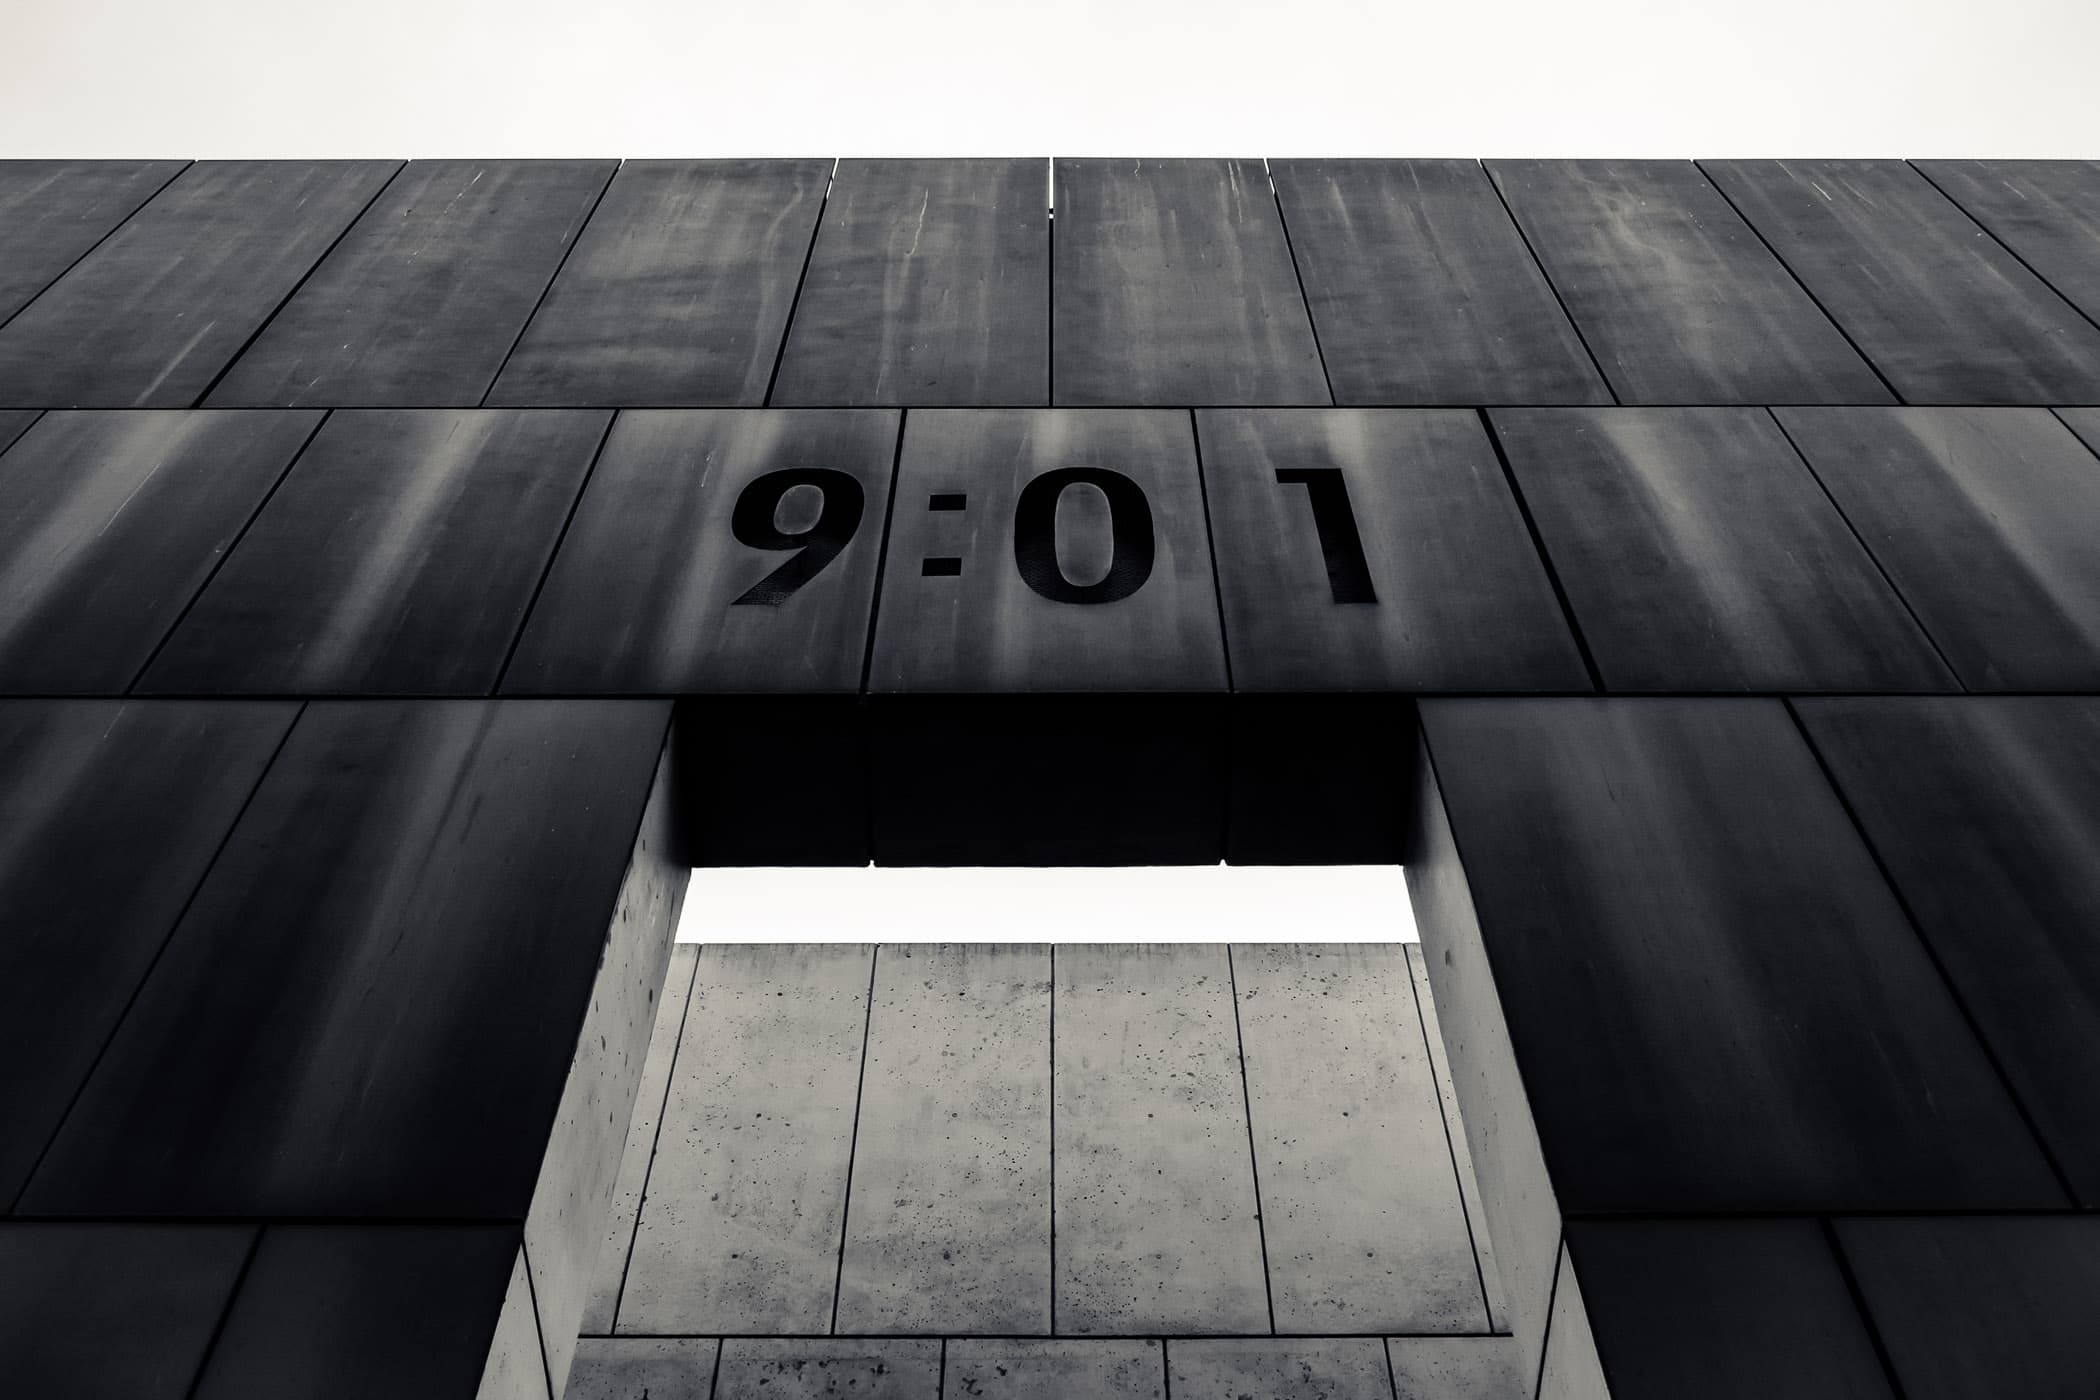 The eastern-most of the Gates of Time at the Oklahoma City National Memorial. Marked with the time 9:01 to signify the last minute of peace prior to the bombing of the Alfred P. Murrah Federal Building on April 19, 1995. A companion gate at the western end of the memorial is marked 9:03 to represent the first minute of recovery after the 9:02 AM explosion.